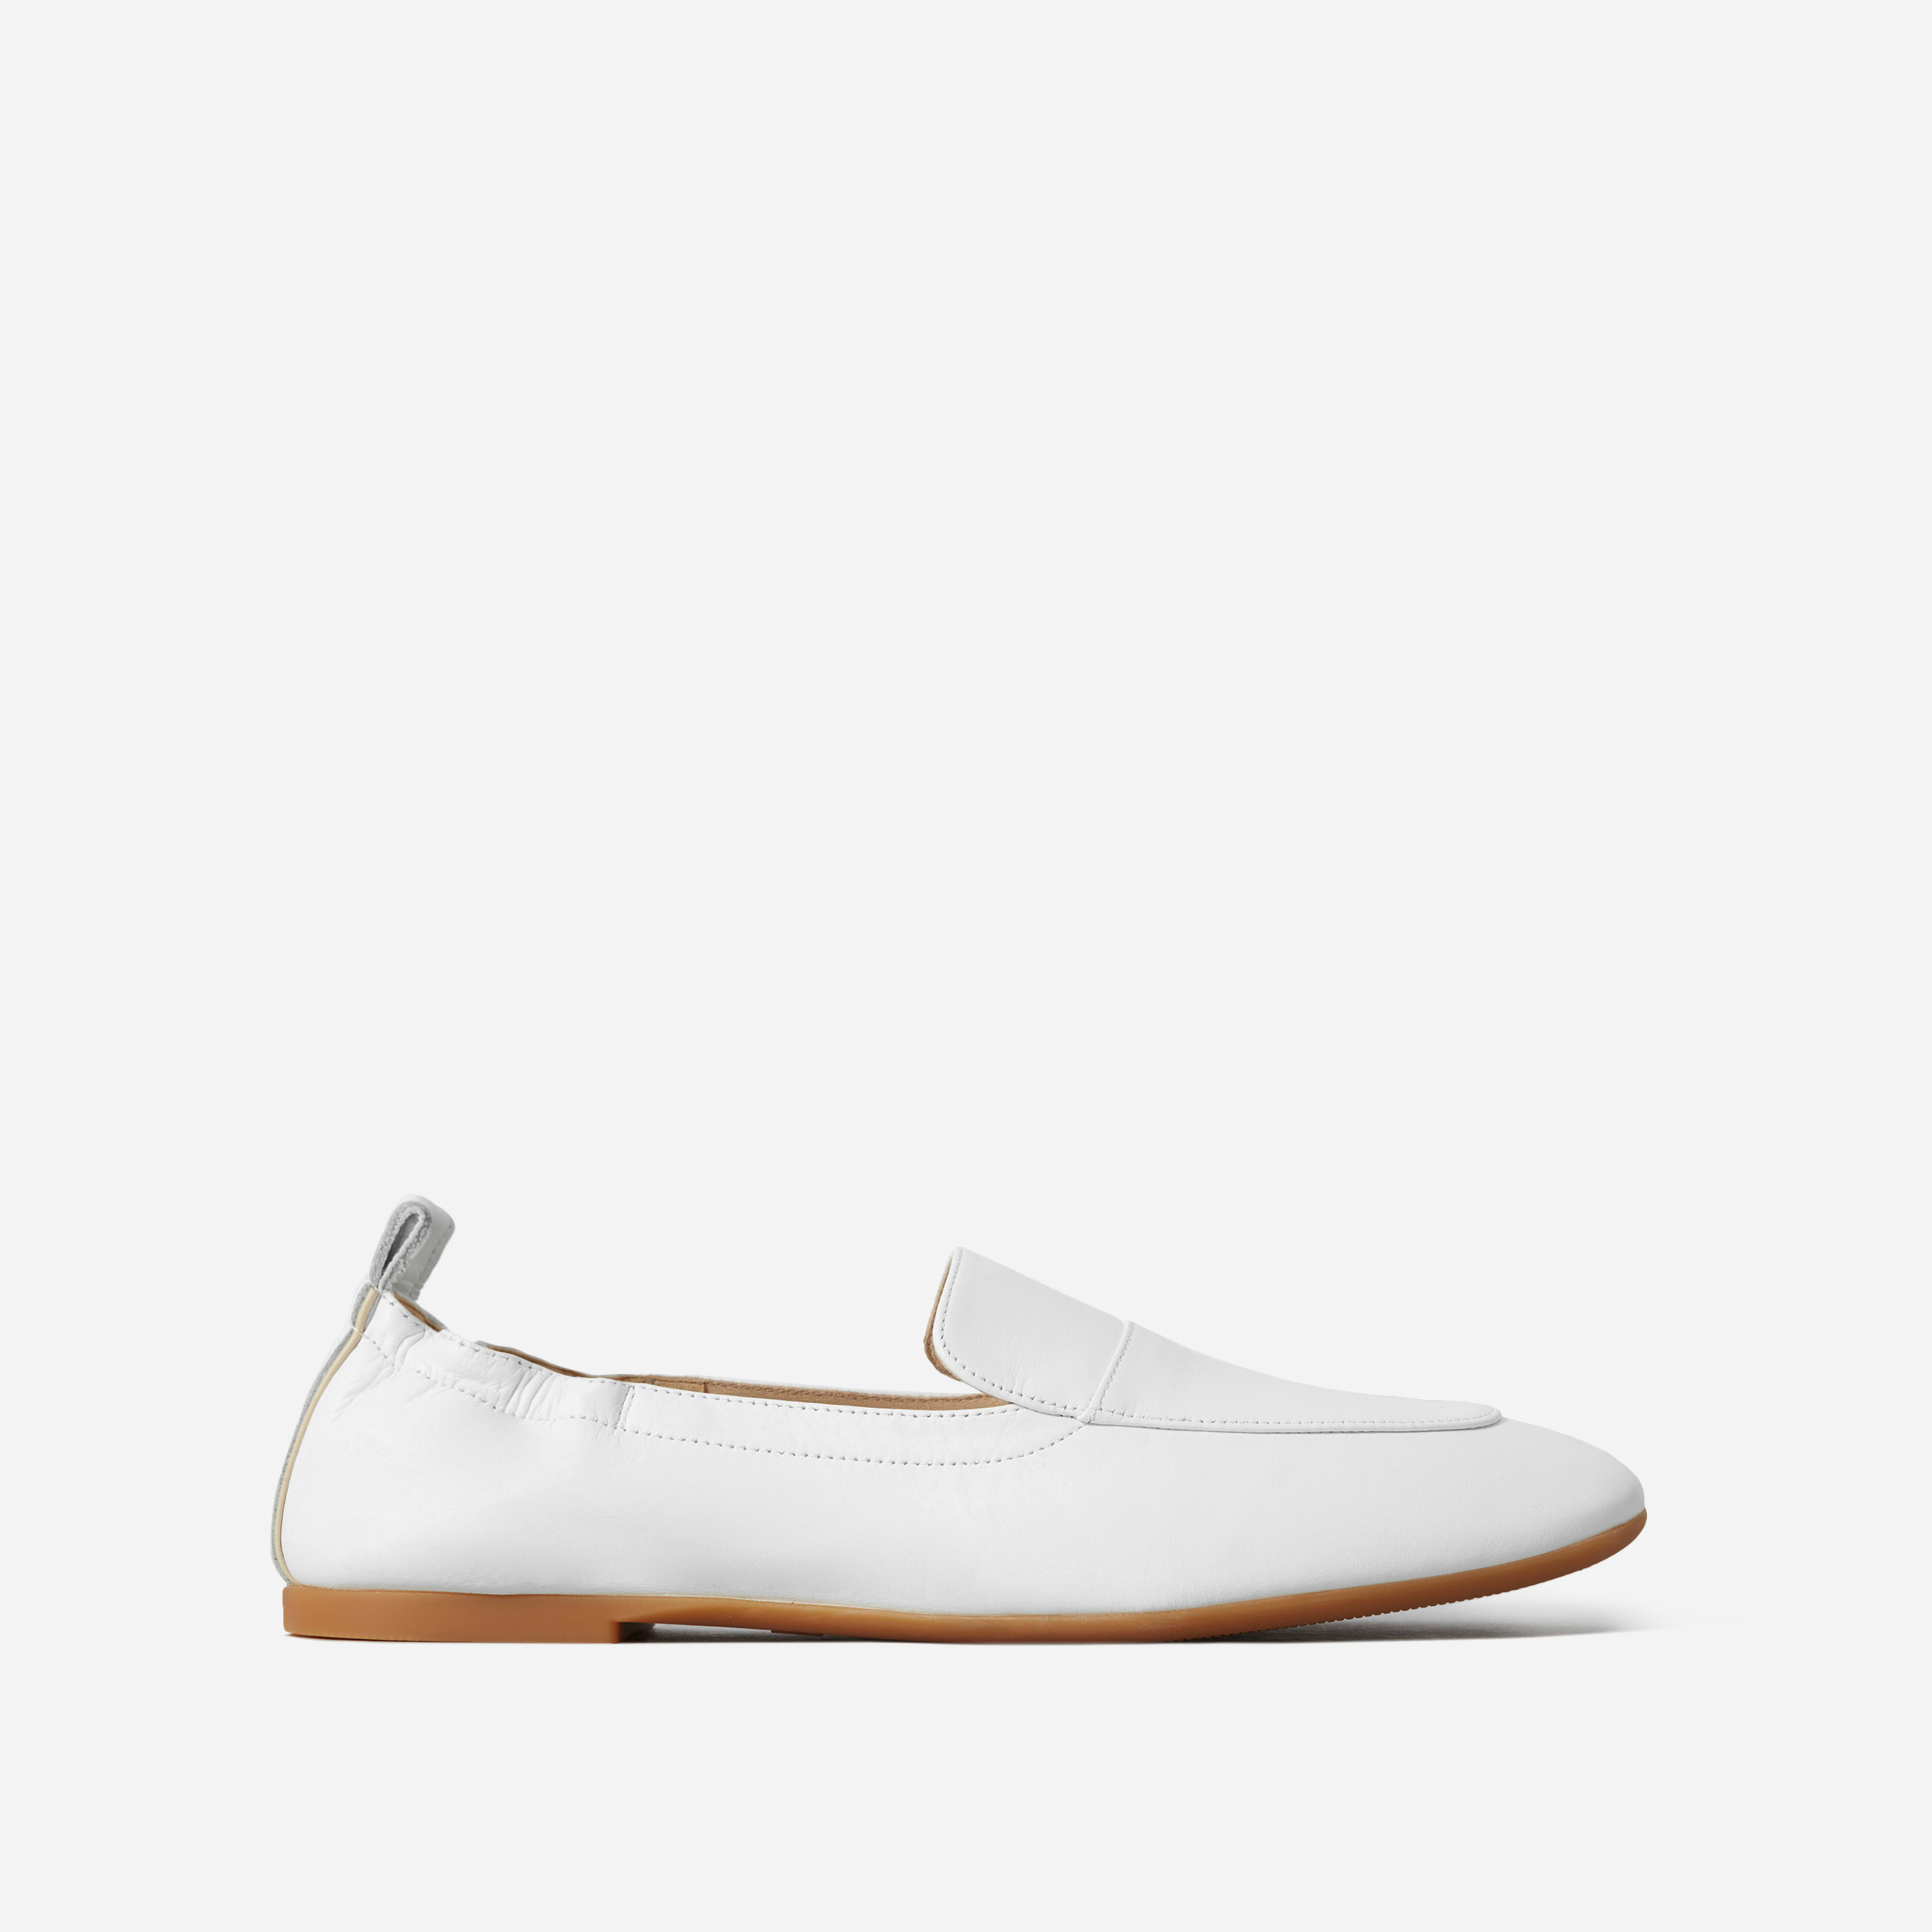 The Day Loafer - Caramel